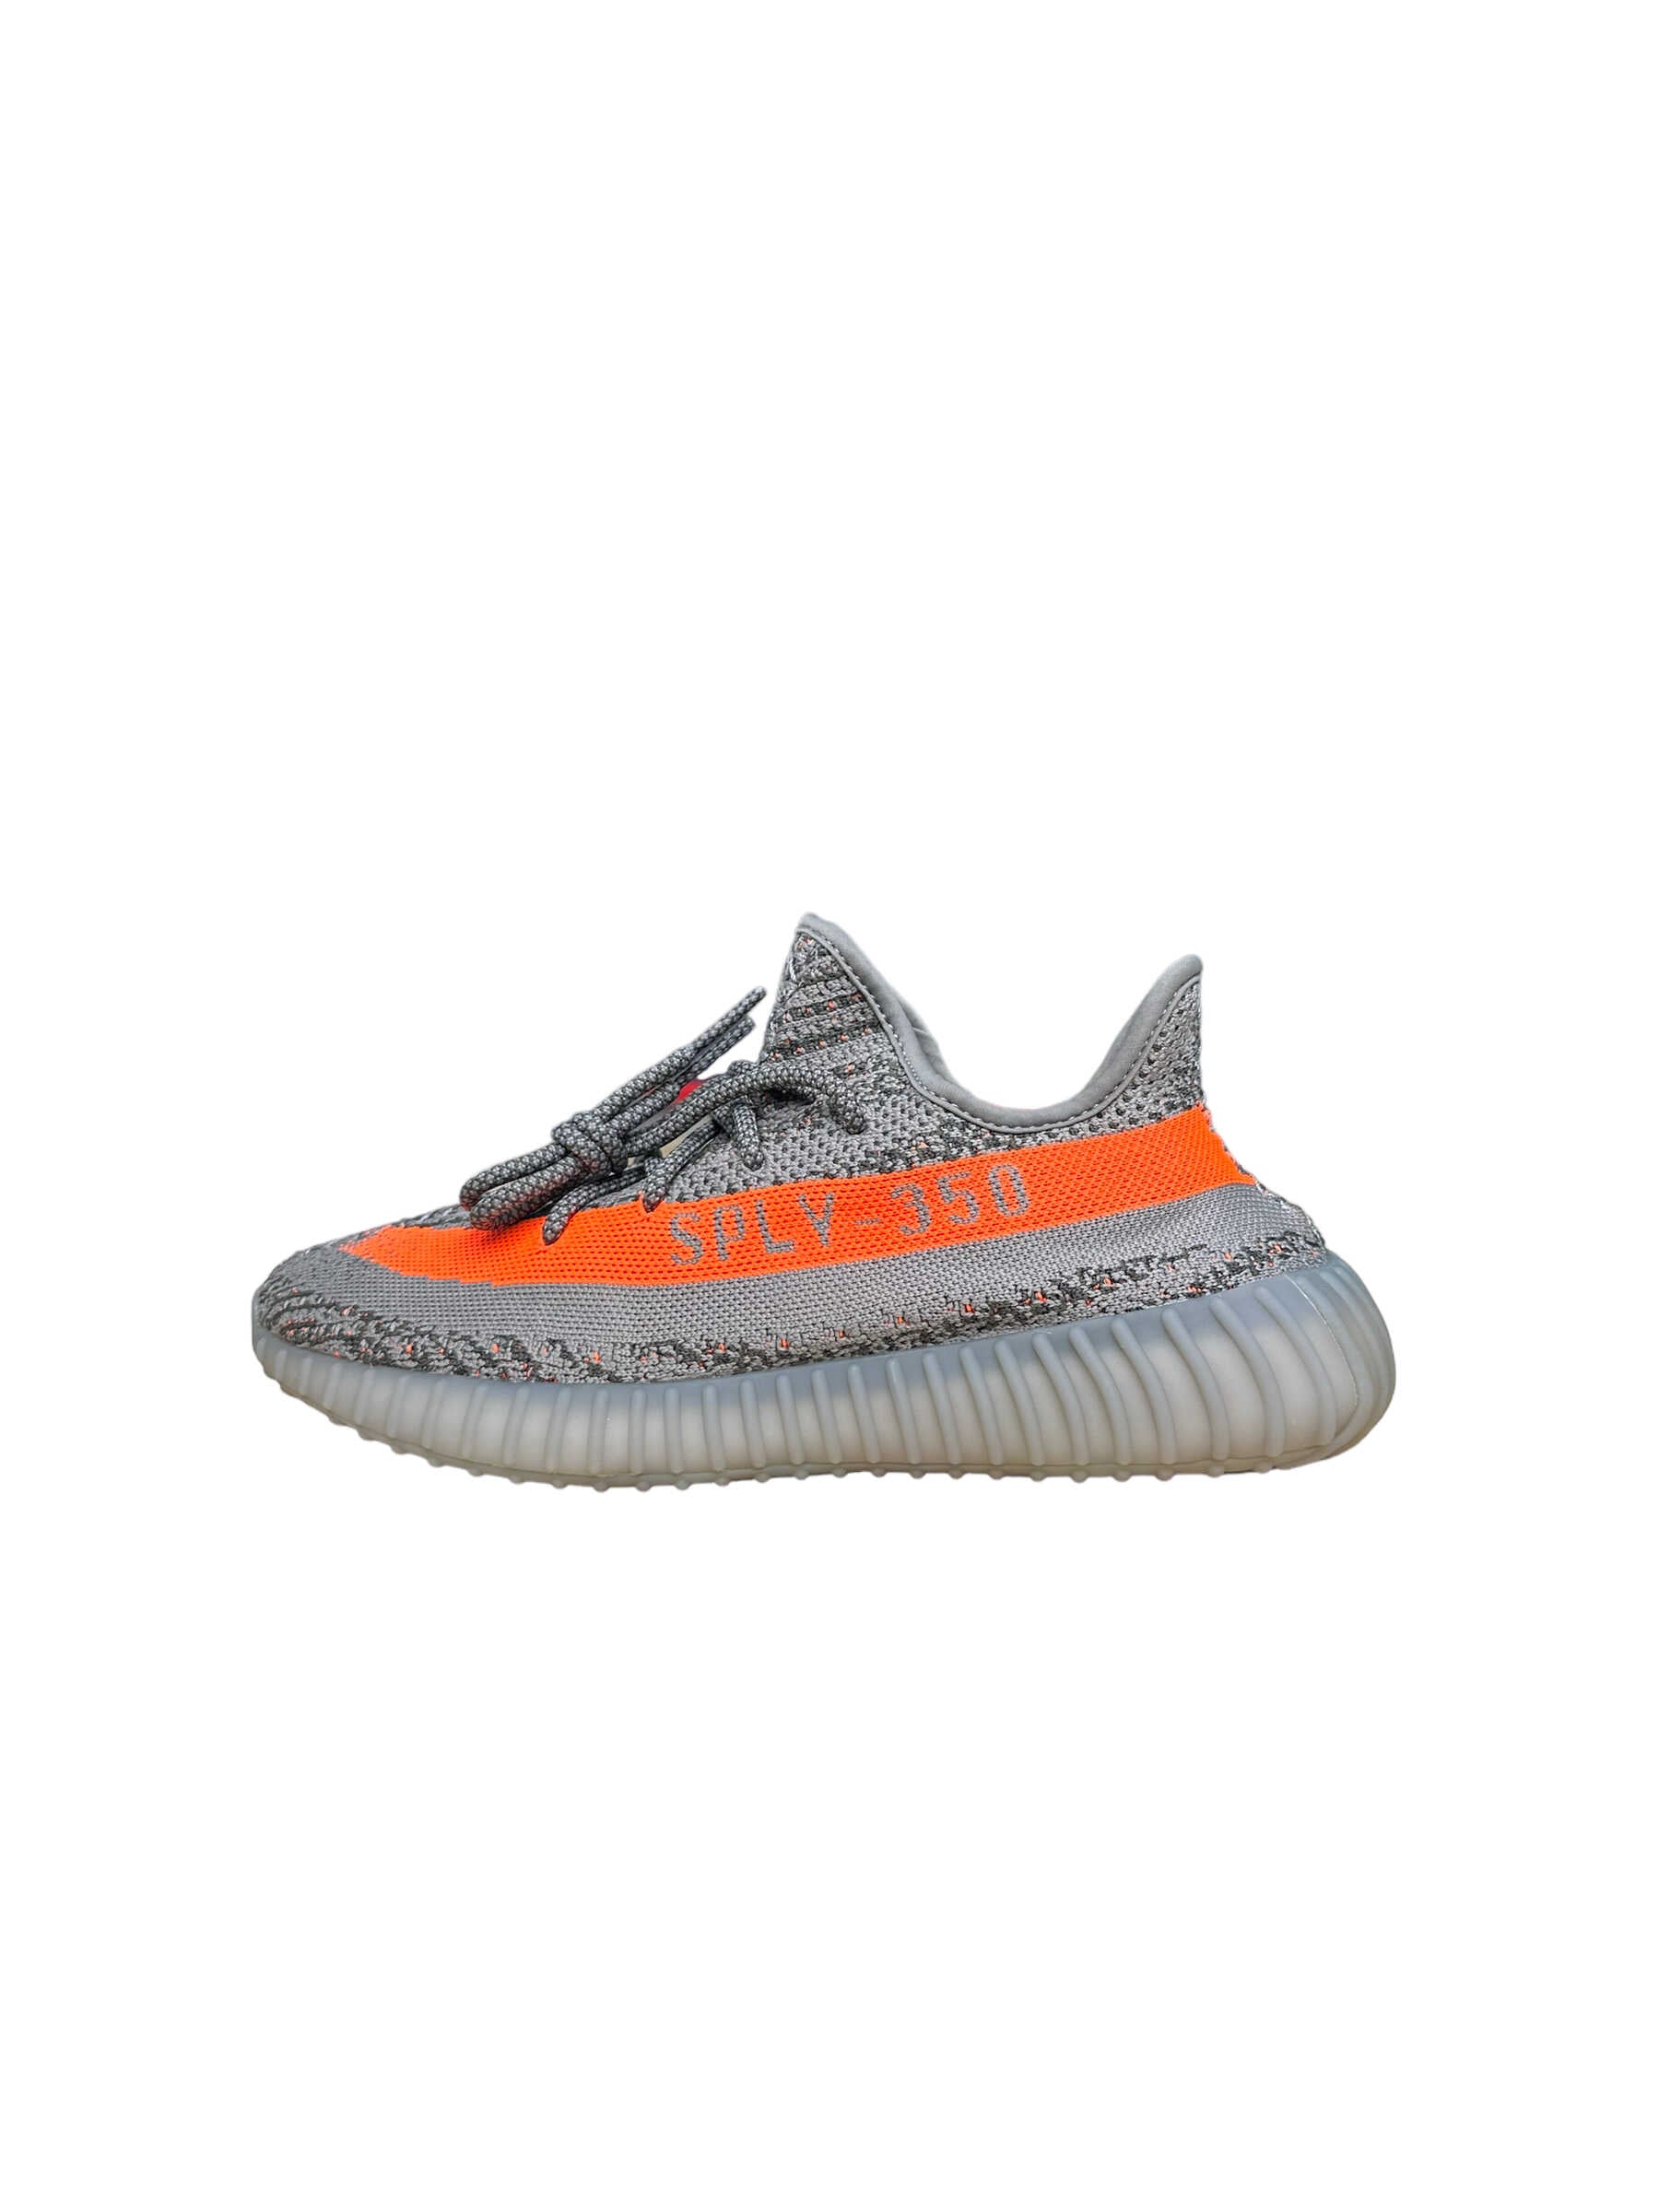 Adidas Yeezy 350 v2 Beluga (RF) Sneakers - Genuine Design Luxury Consignment for Men. New & Pre-Owned Clothing, Shoes, & Accessories. Calgary, Canada